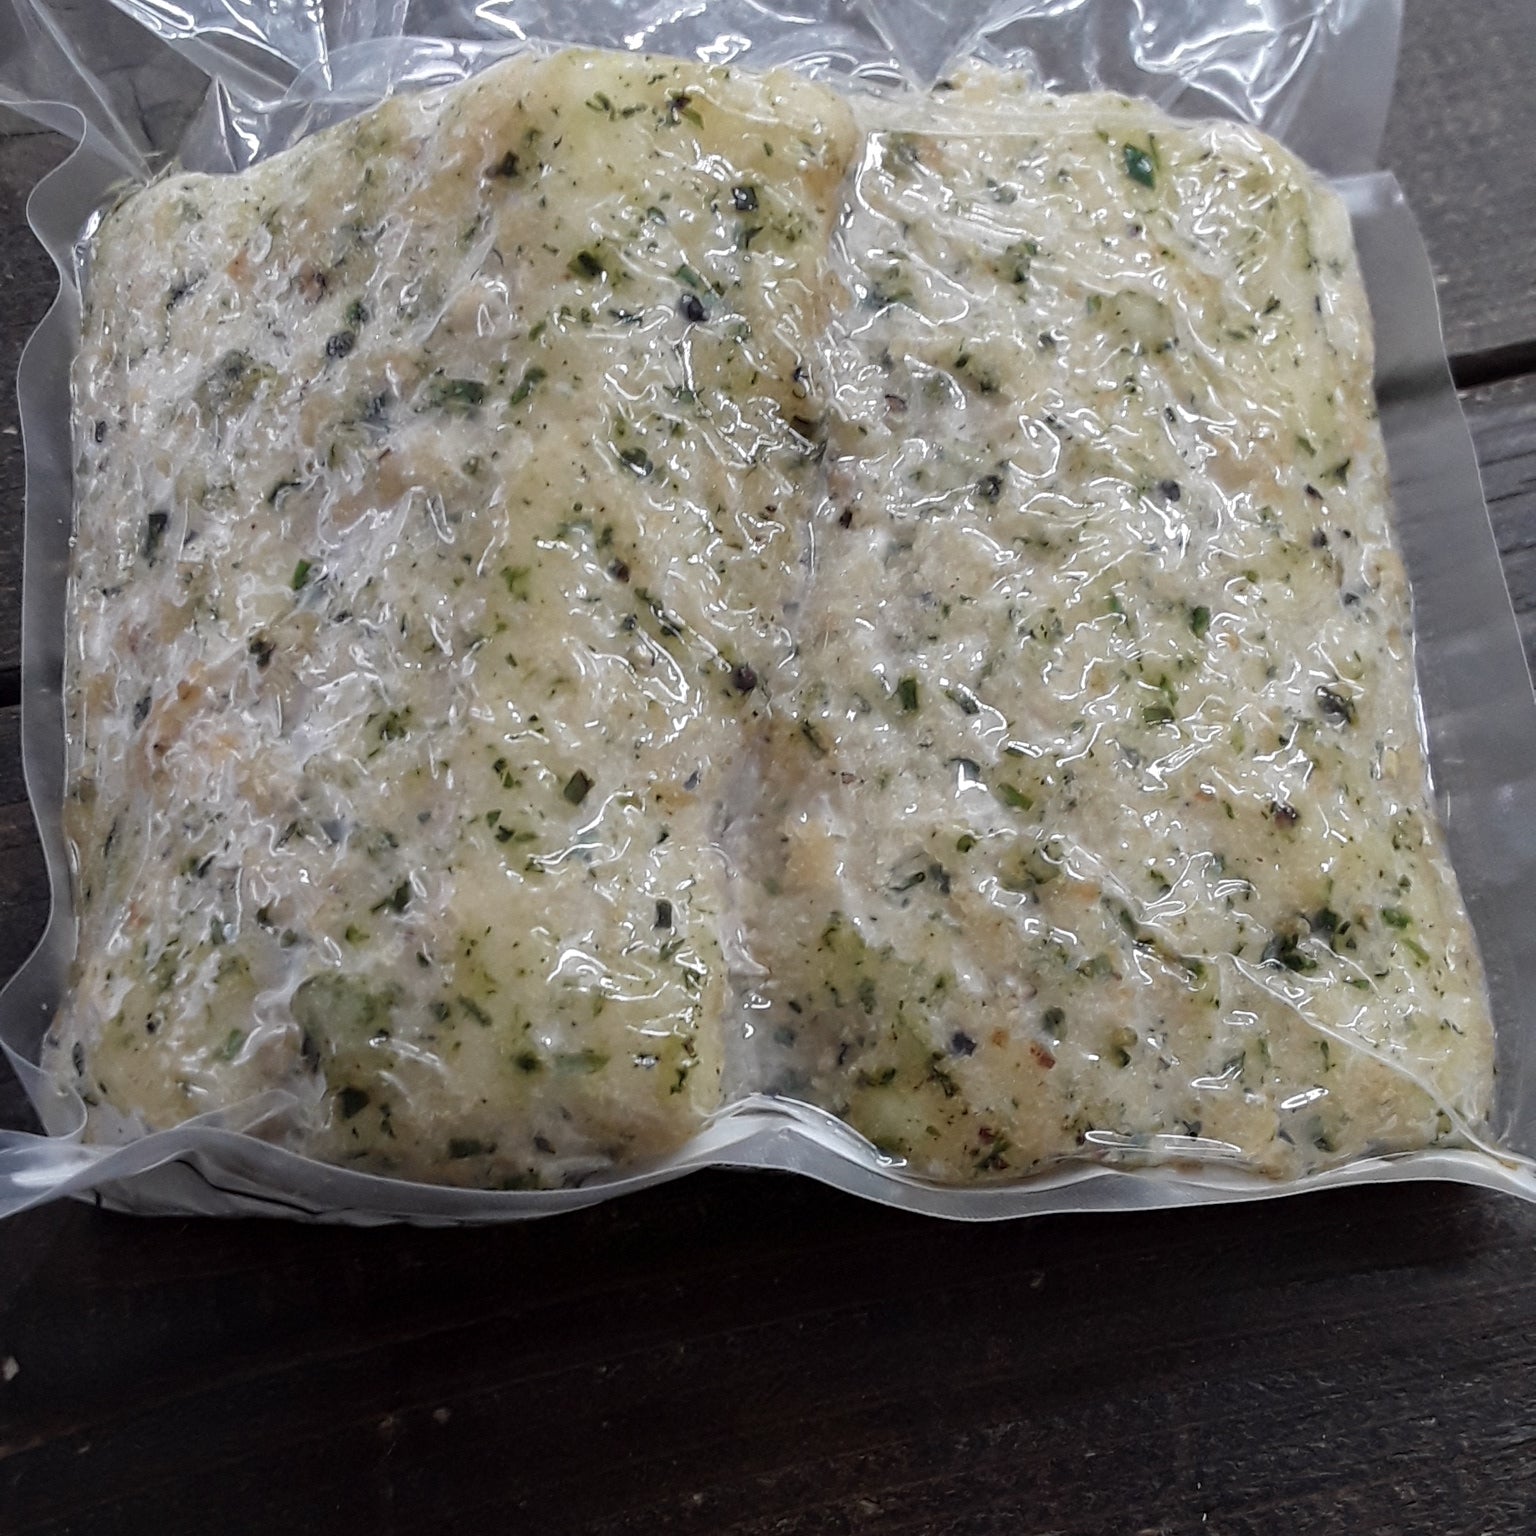 Wild Canadian Summer Herb Crusted Cod - Frozen